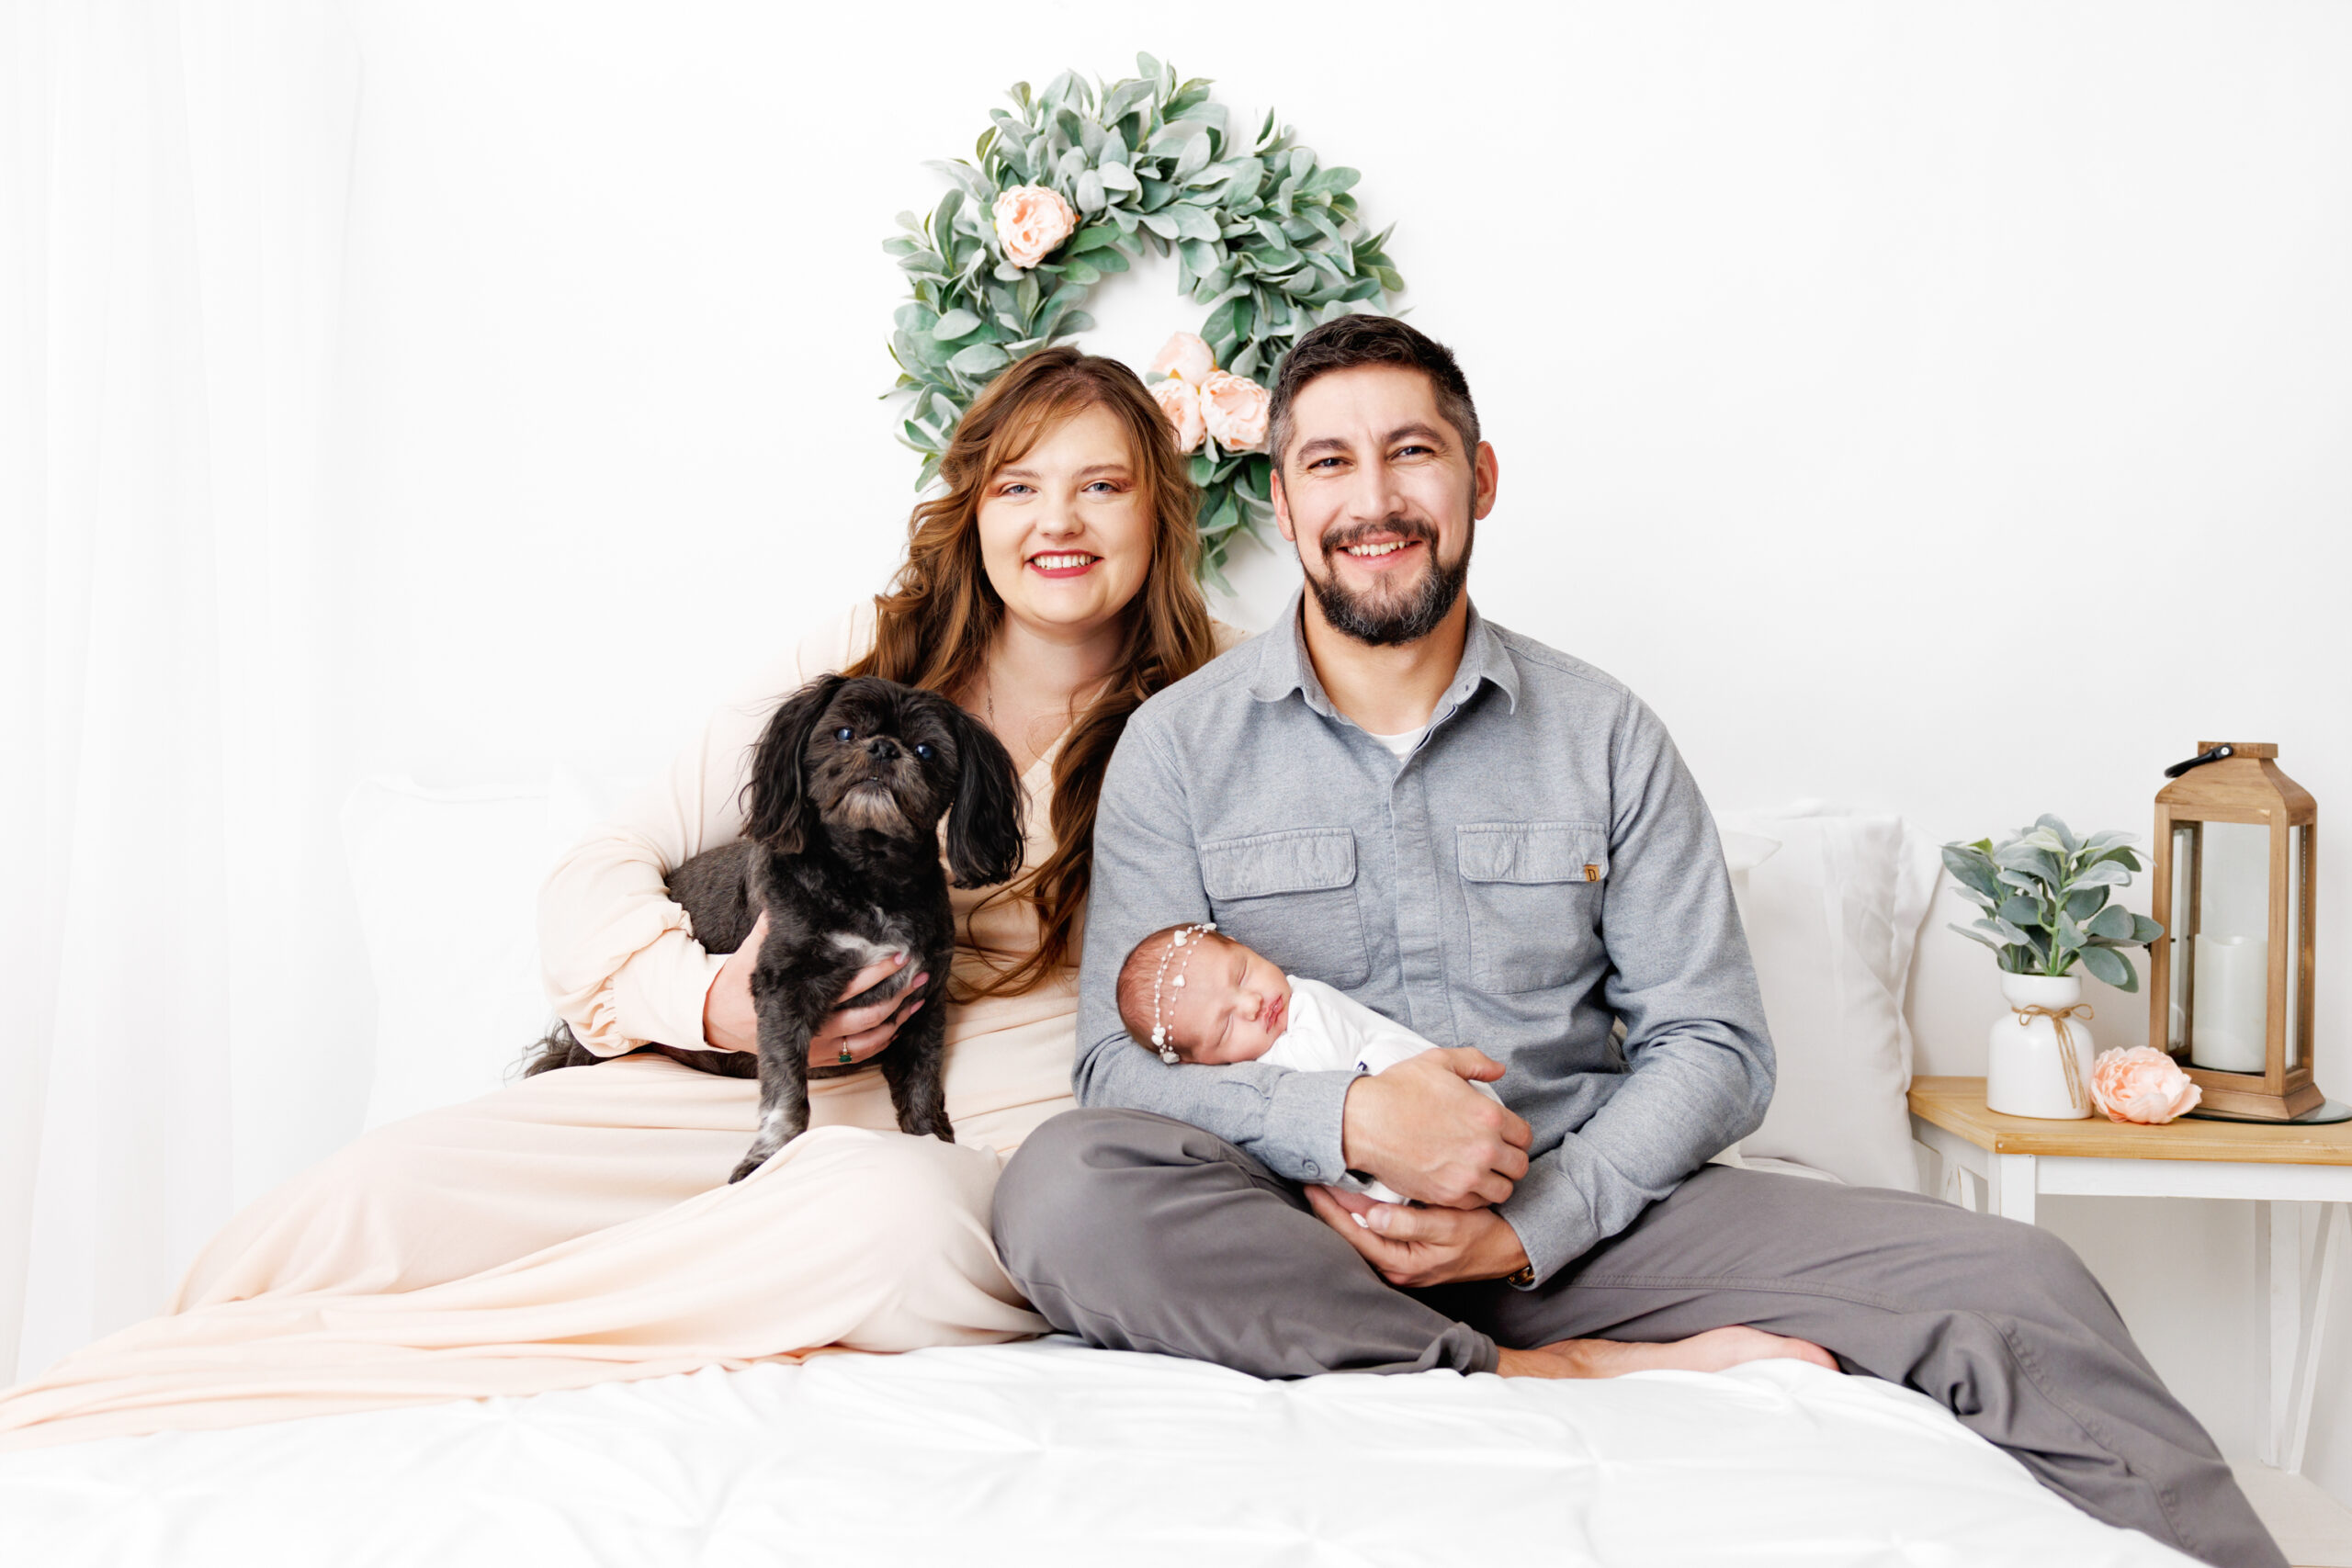 Newborn Photos with Family Grand Junction CO